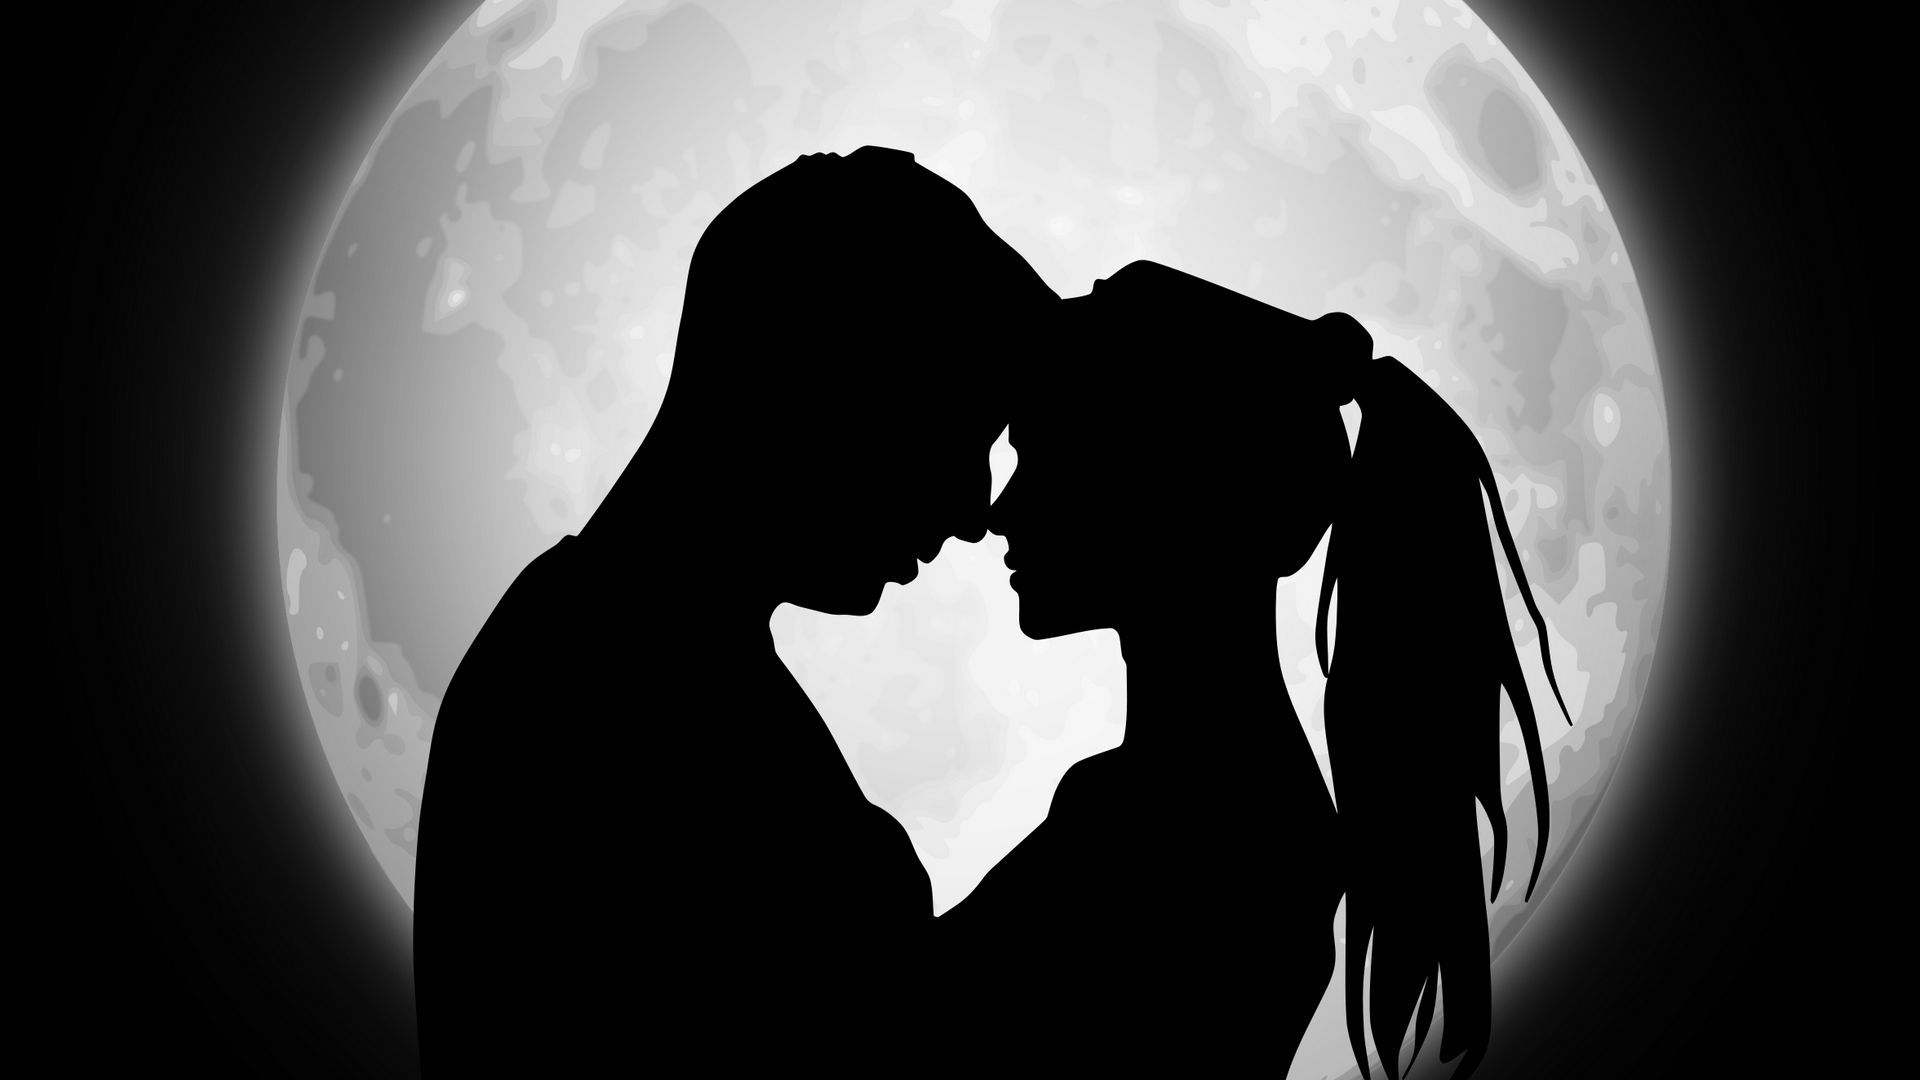 Download wallpaper 1920x1080 couple, silhouettes, moon, love full